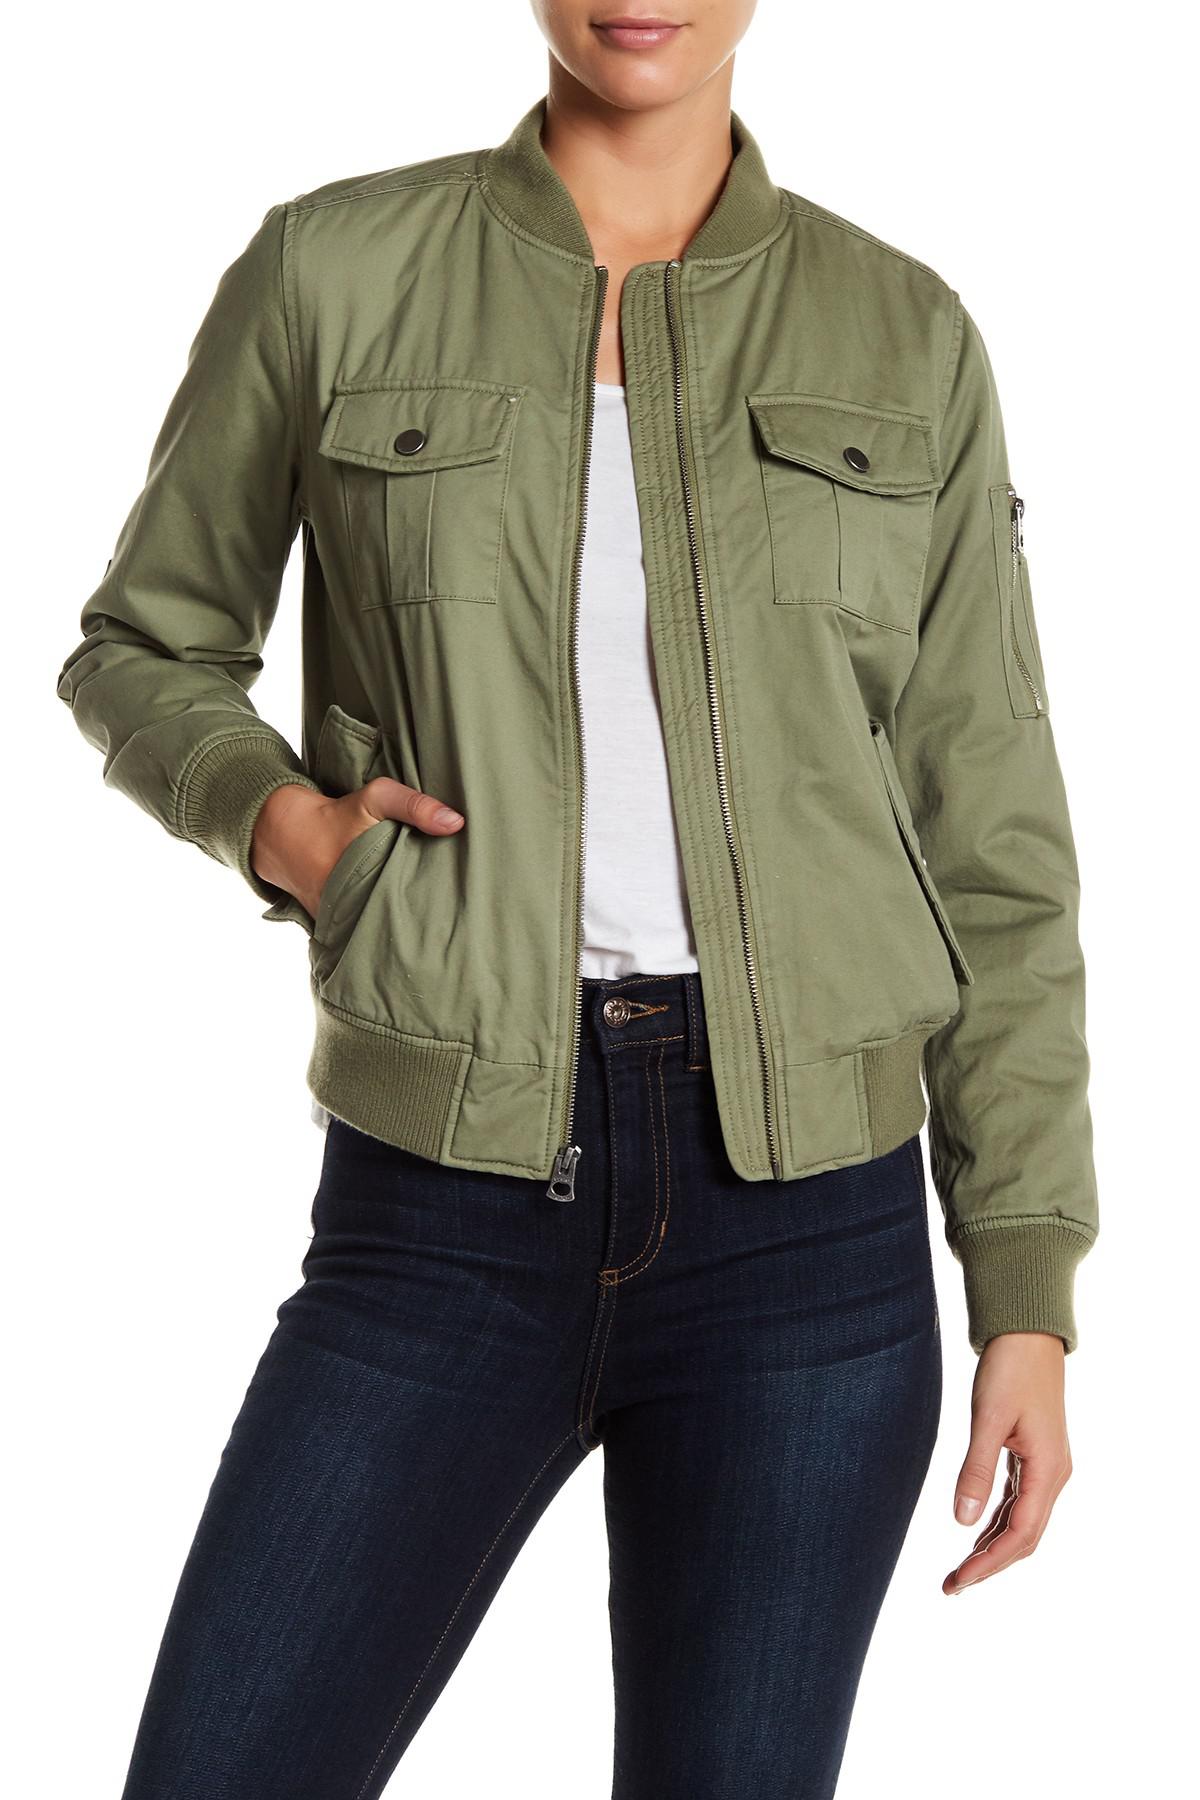 Lyst - Lucky Brand Long Bomber Jacket in Green